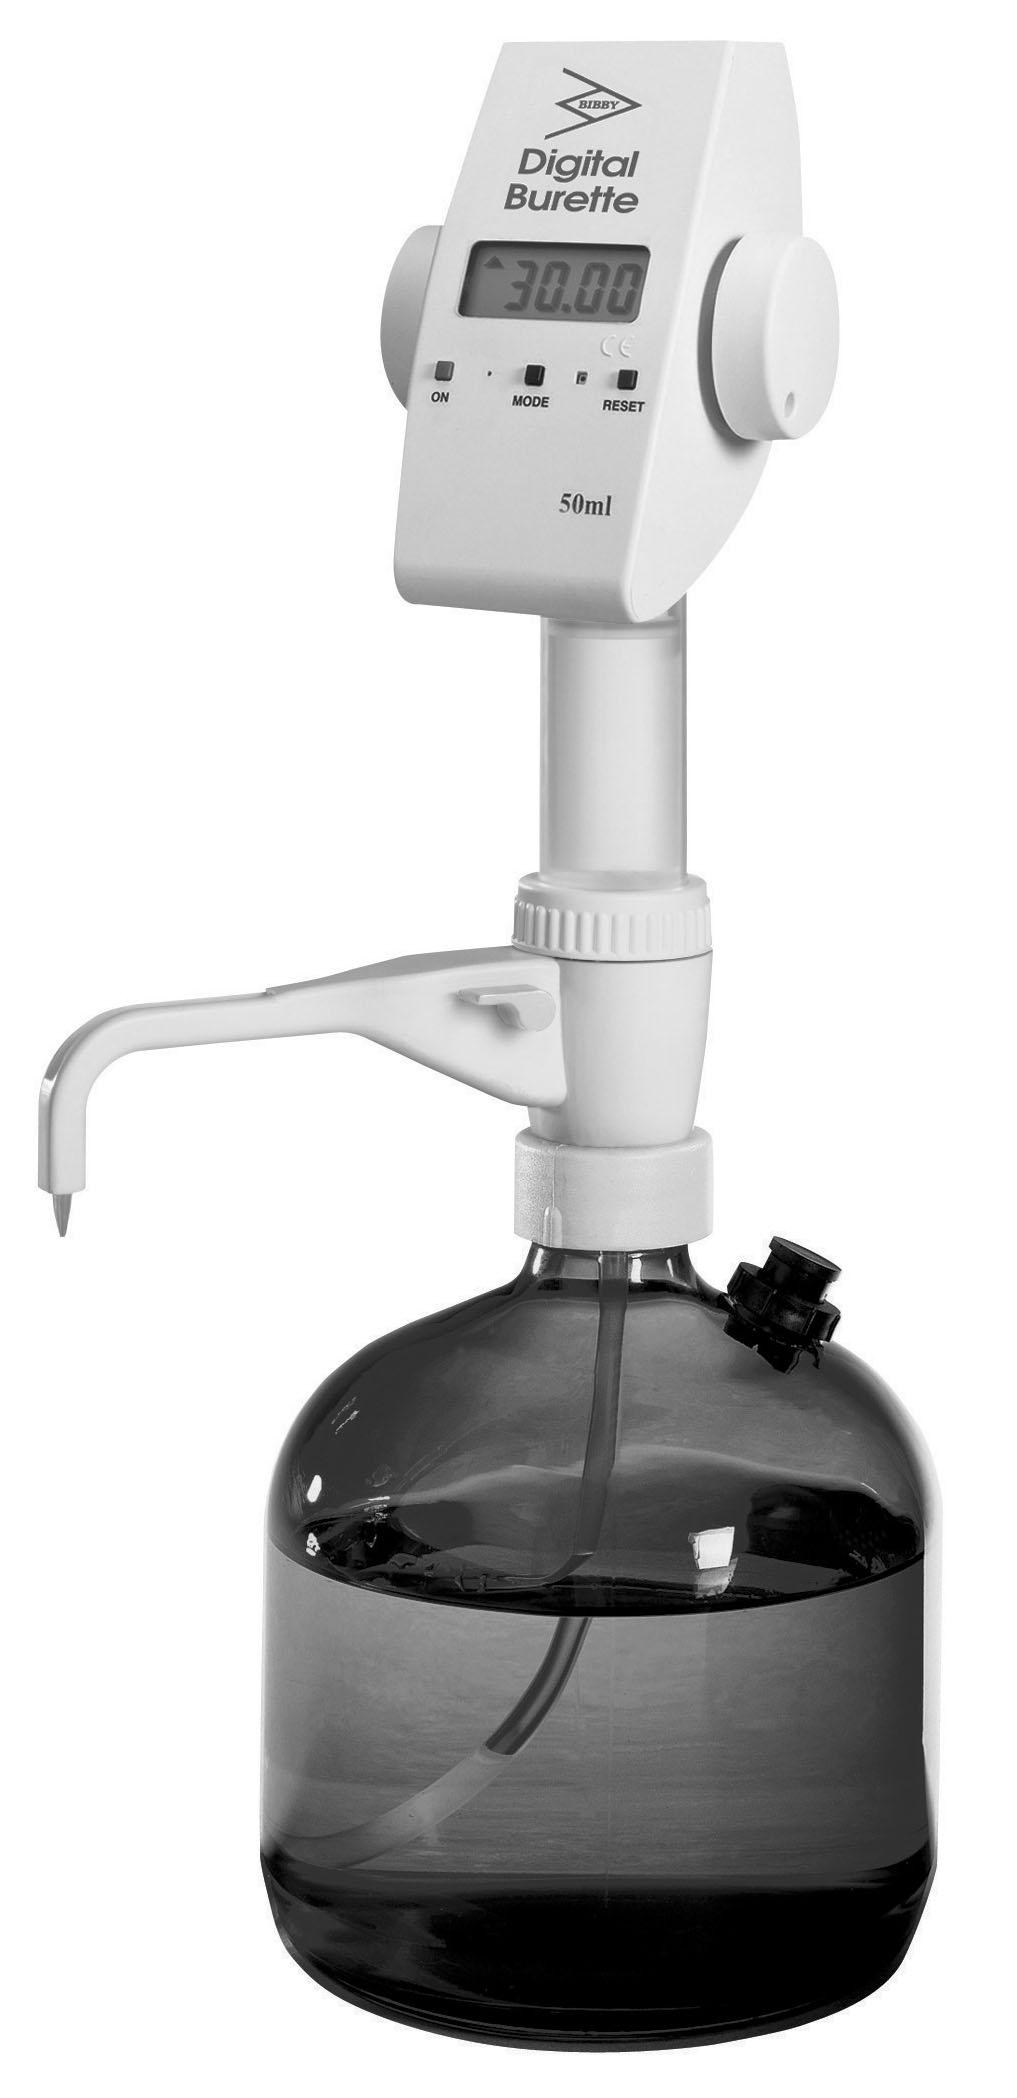 Digital Burette Assembly and operating